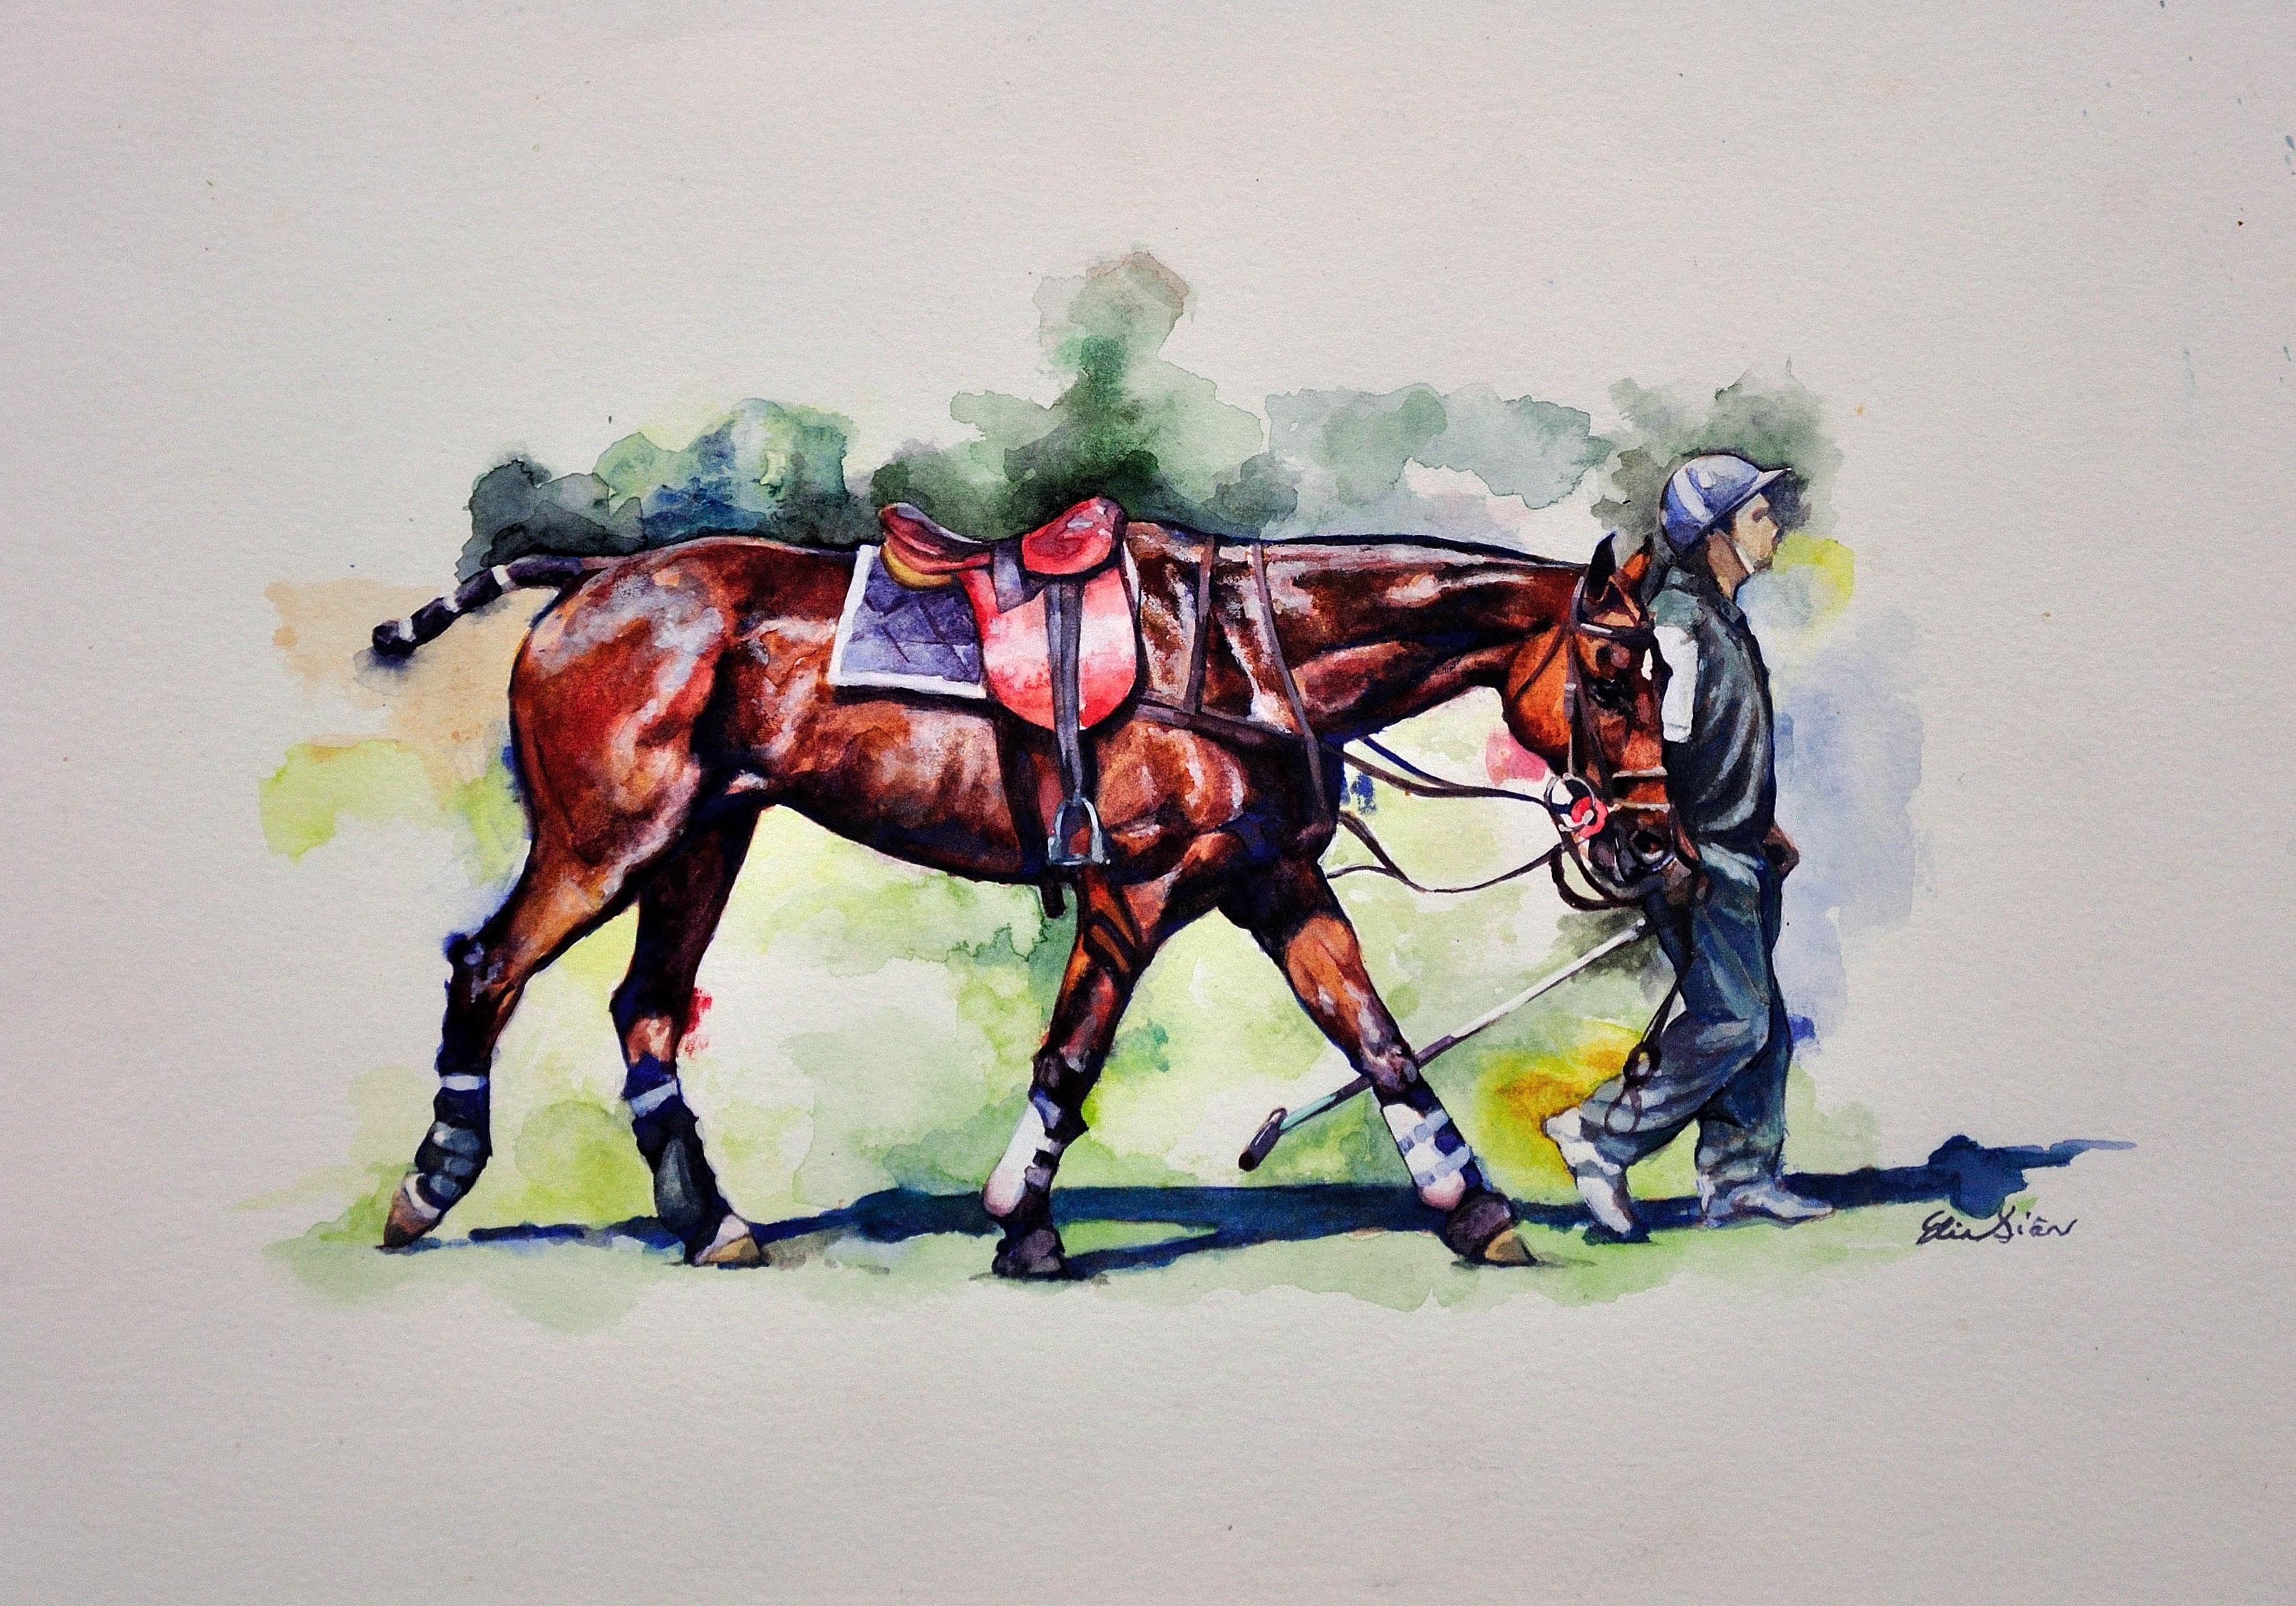 Polo Match, Cirencester, Player Leading Pony. Cotswolds. Framed Watercolor. - Art by Elin Sian Blake